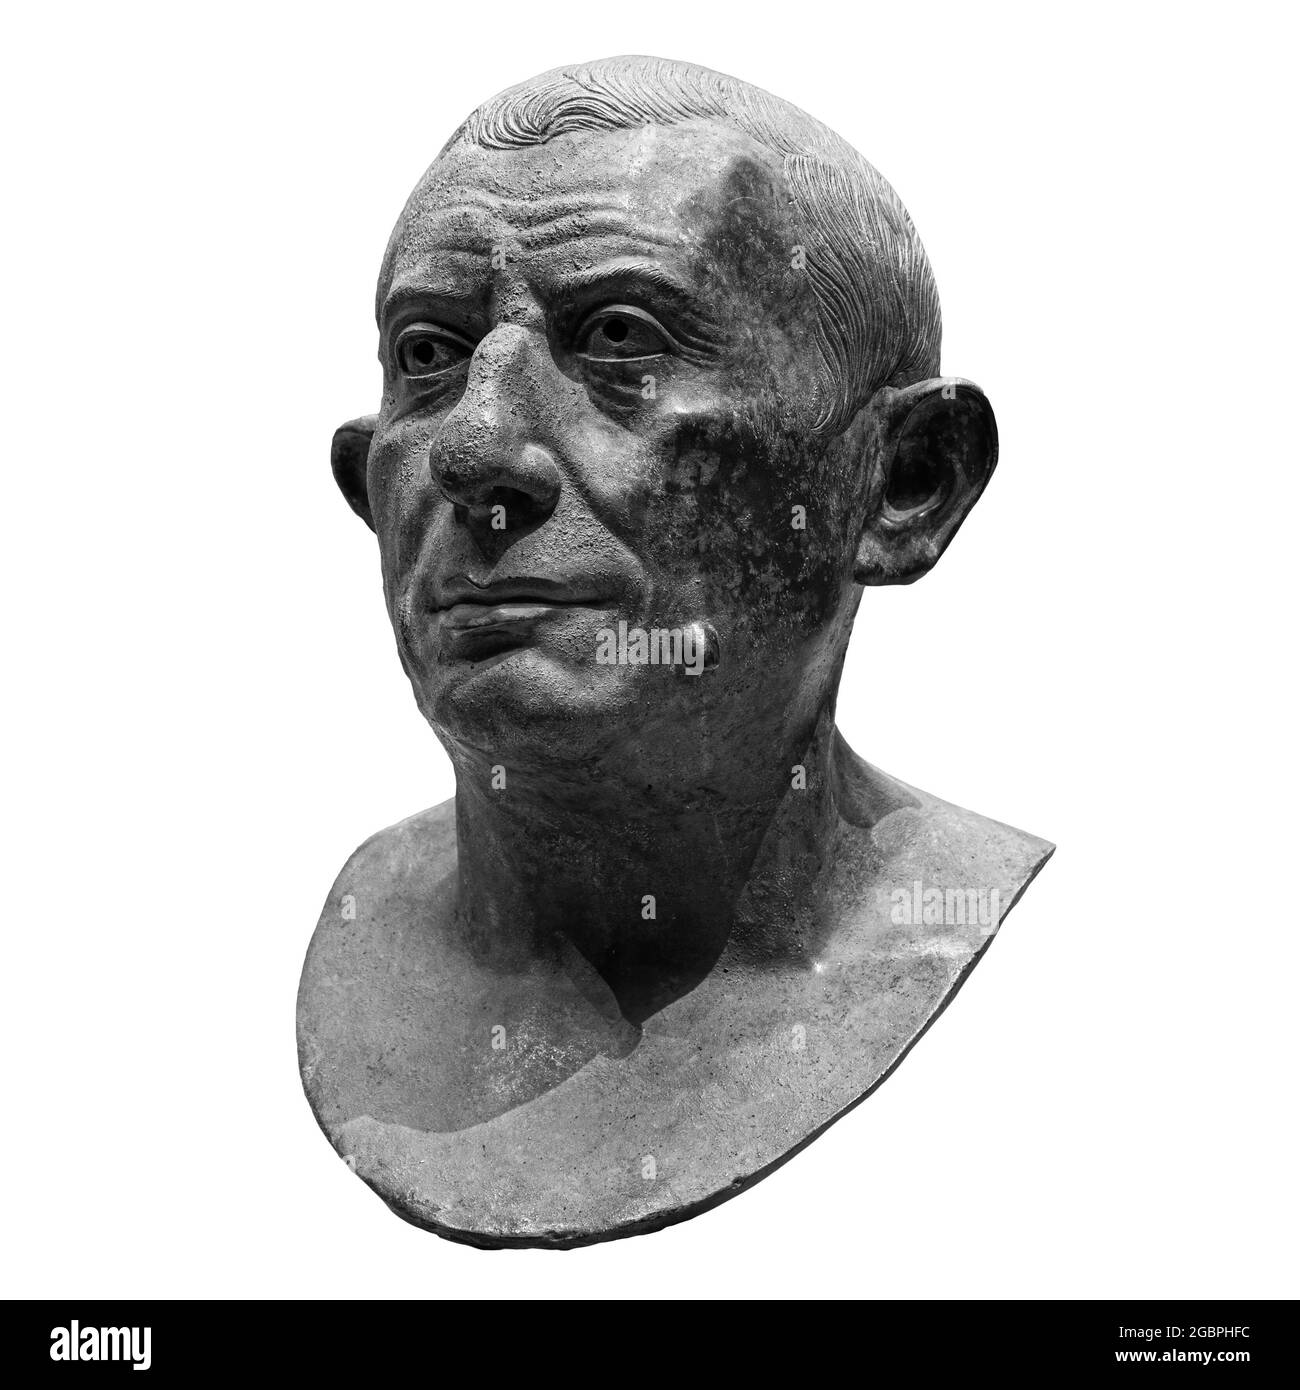 Copy of ancient statue Lucius Caecilius Iucundus. Head and shoulders detail of the ancient man sculpture. Antique face statue isolated on white Stock Photo